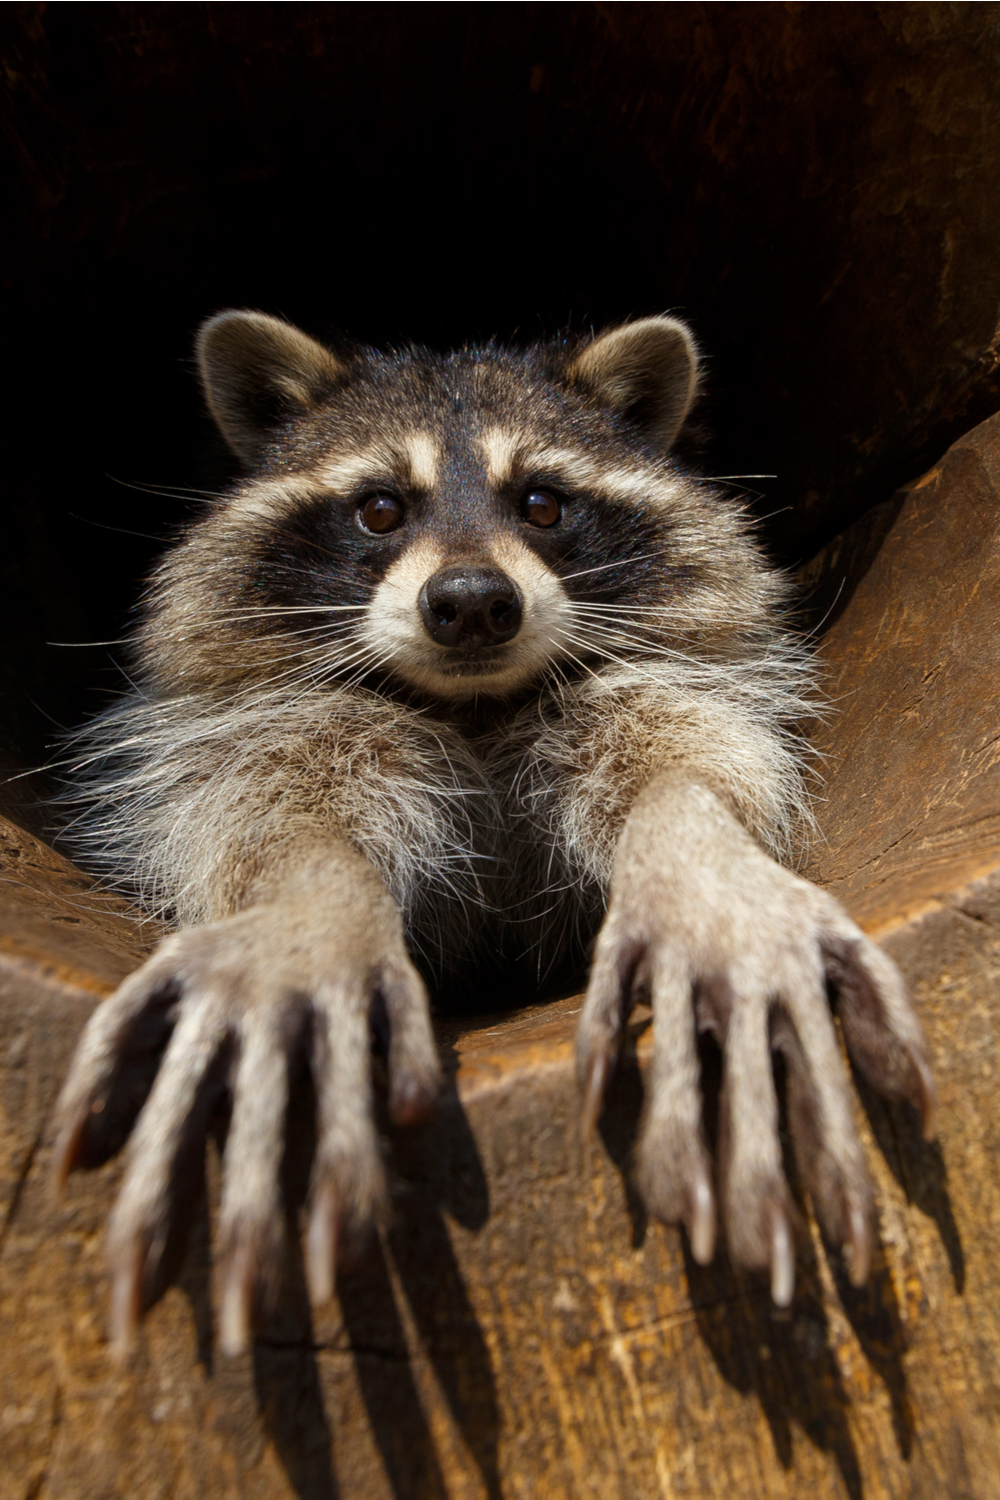 Why the raccoon washes his hands